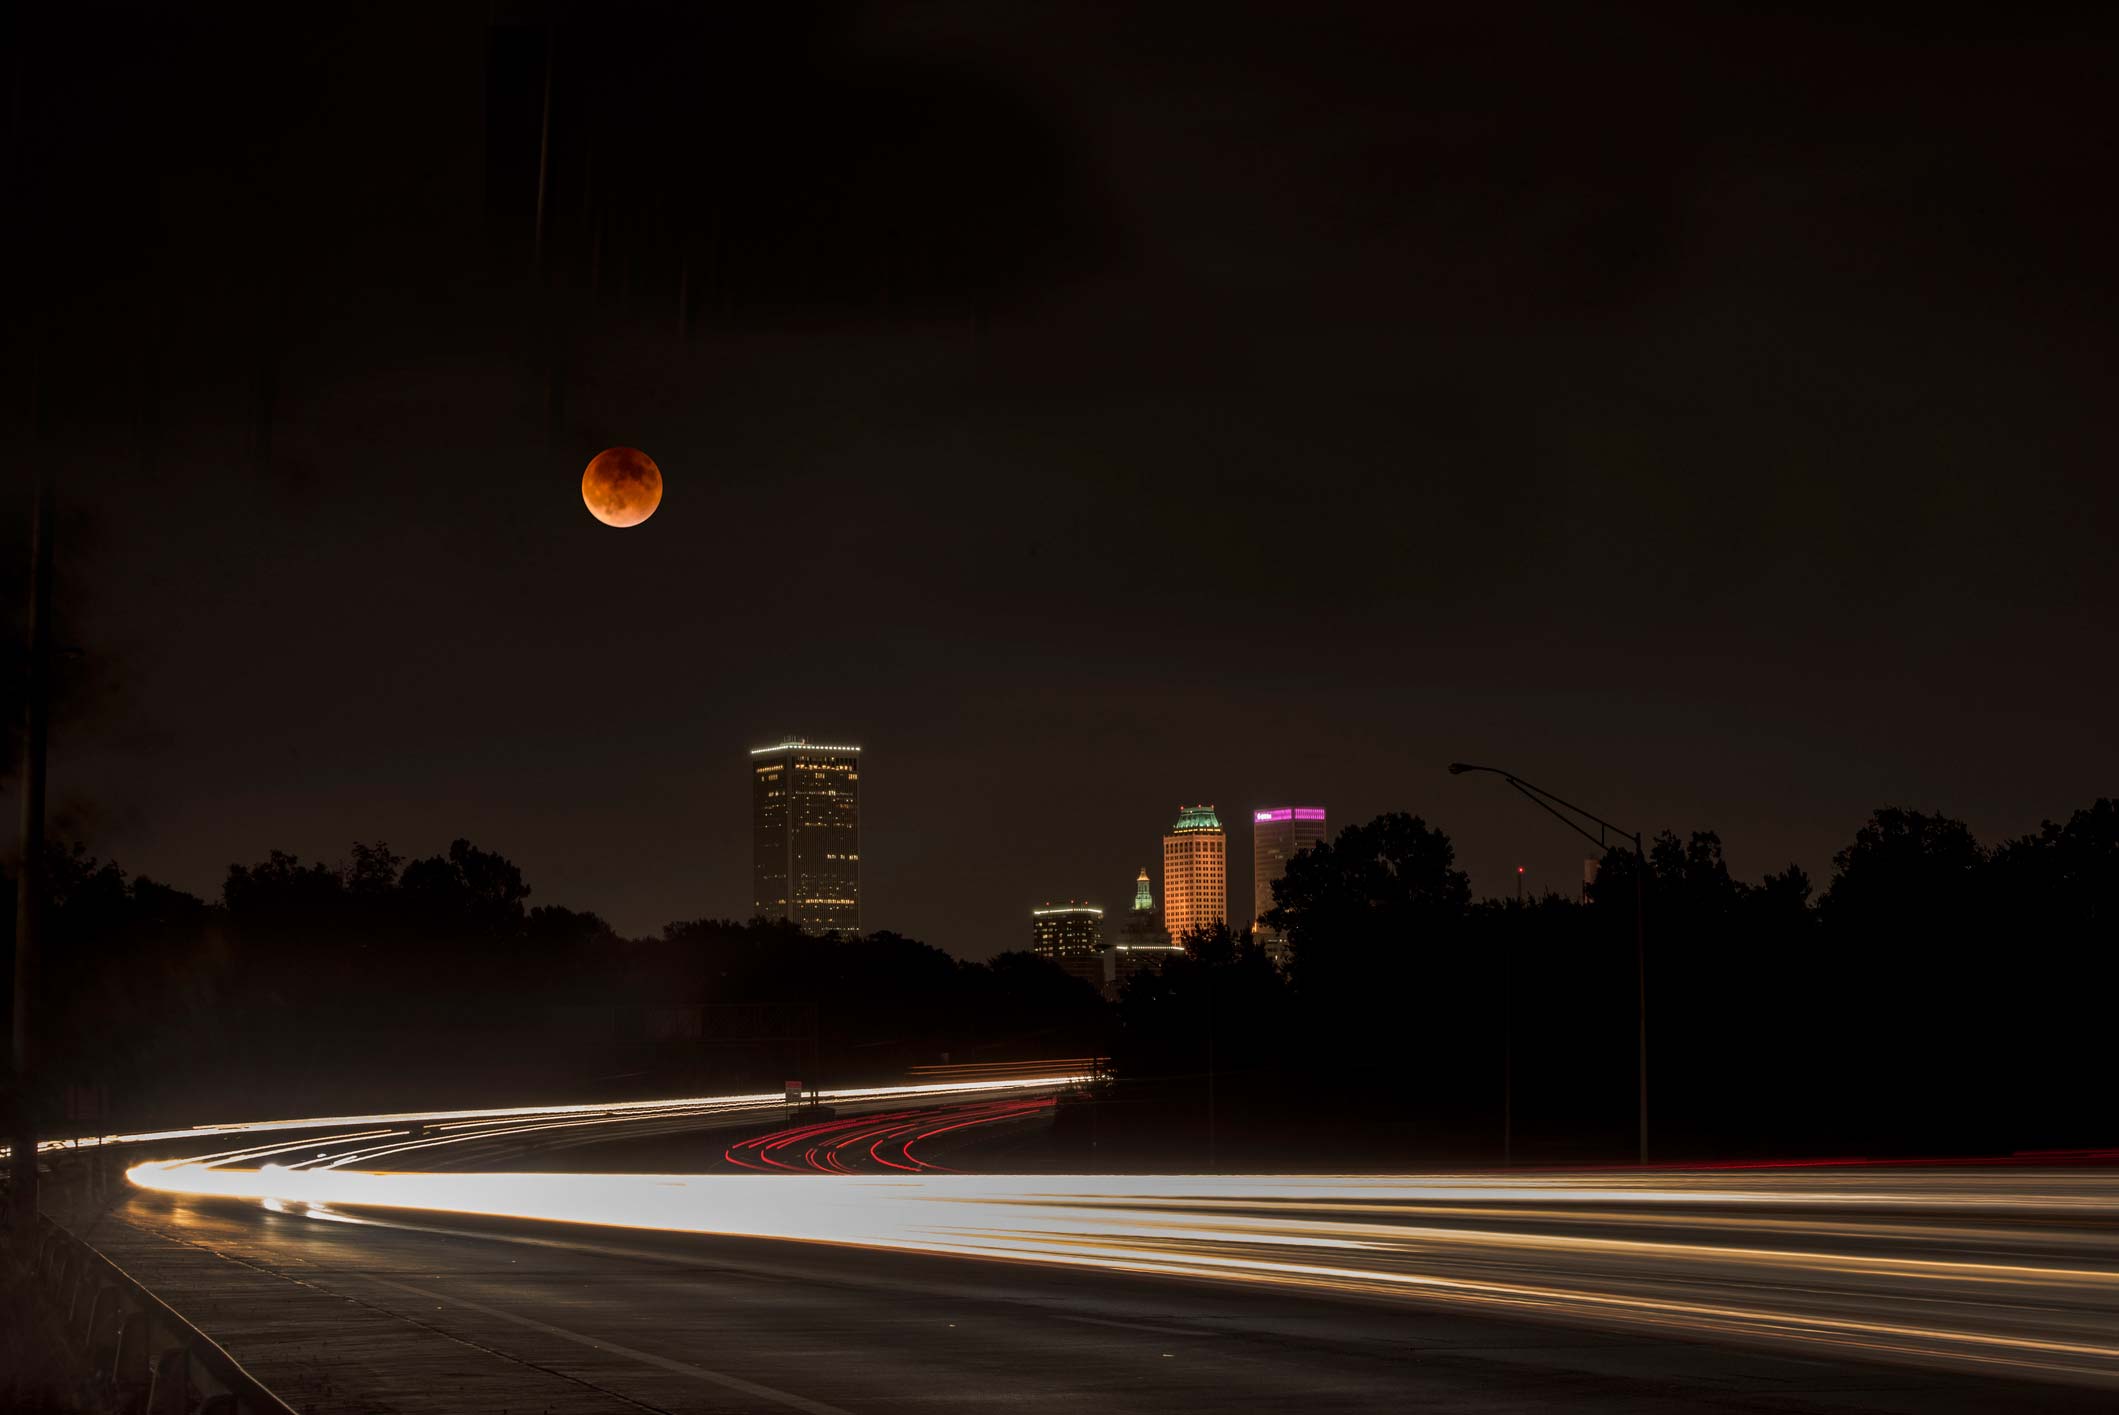 Photographing the Lunar Eclipse